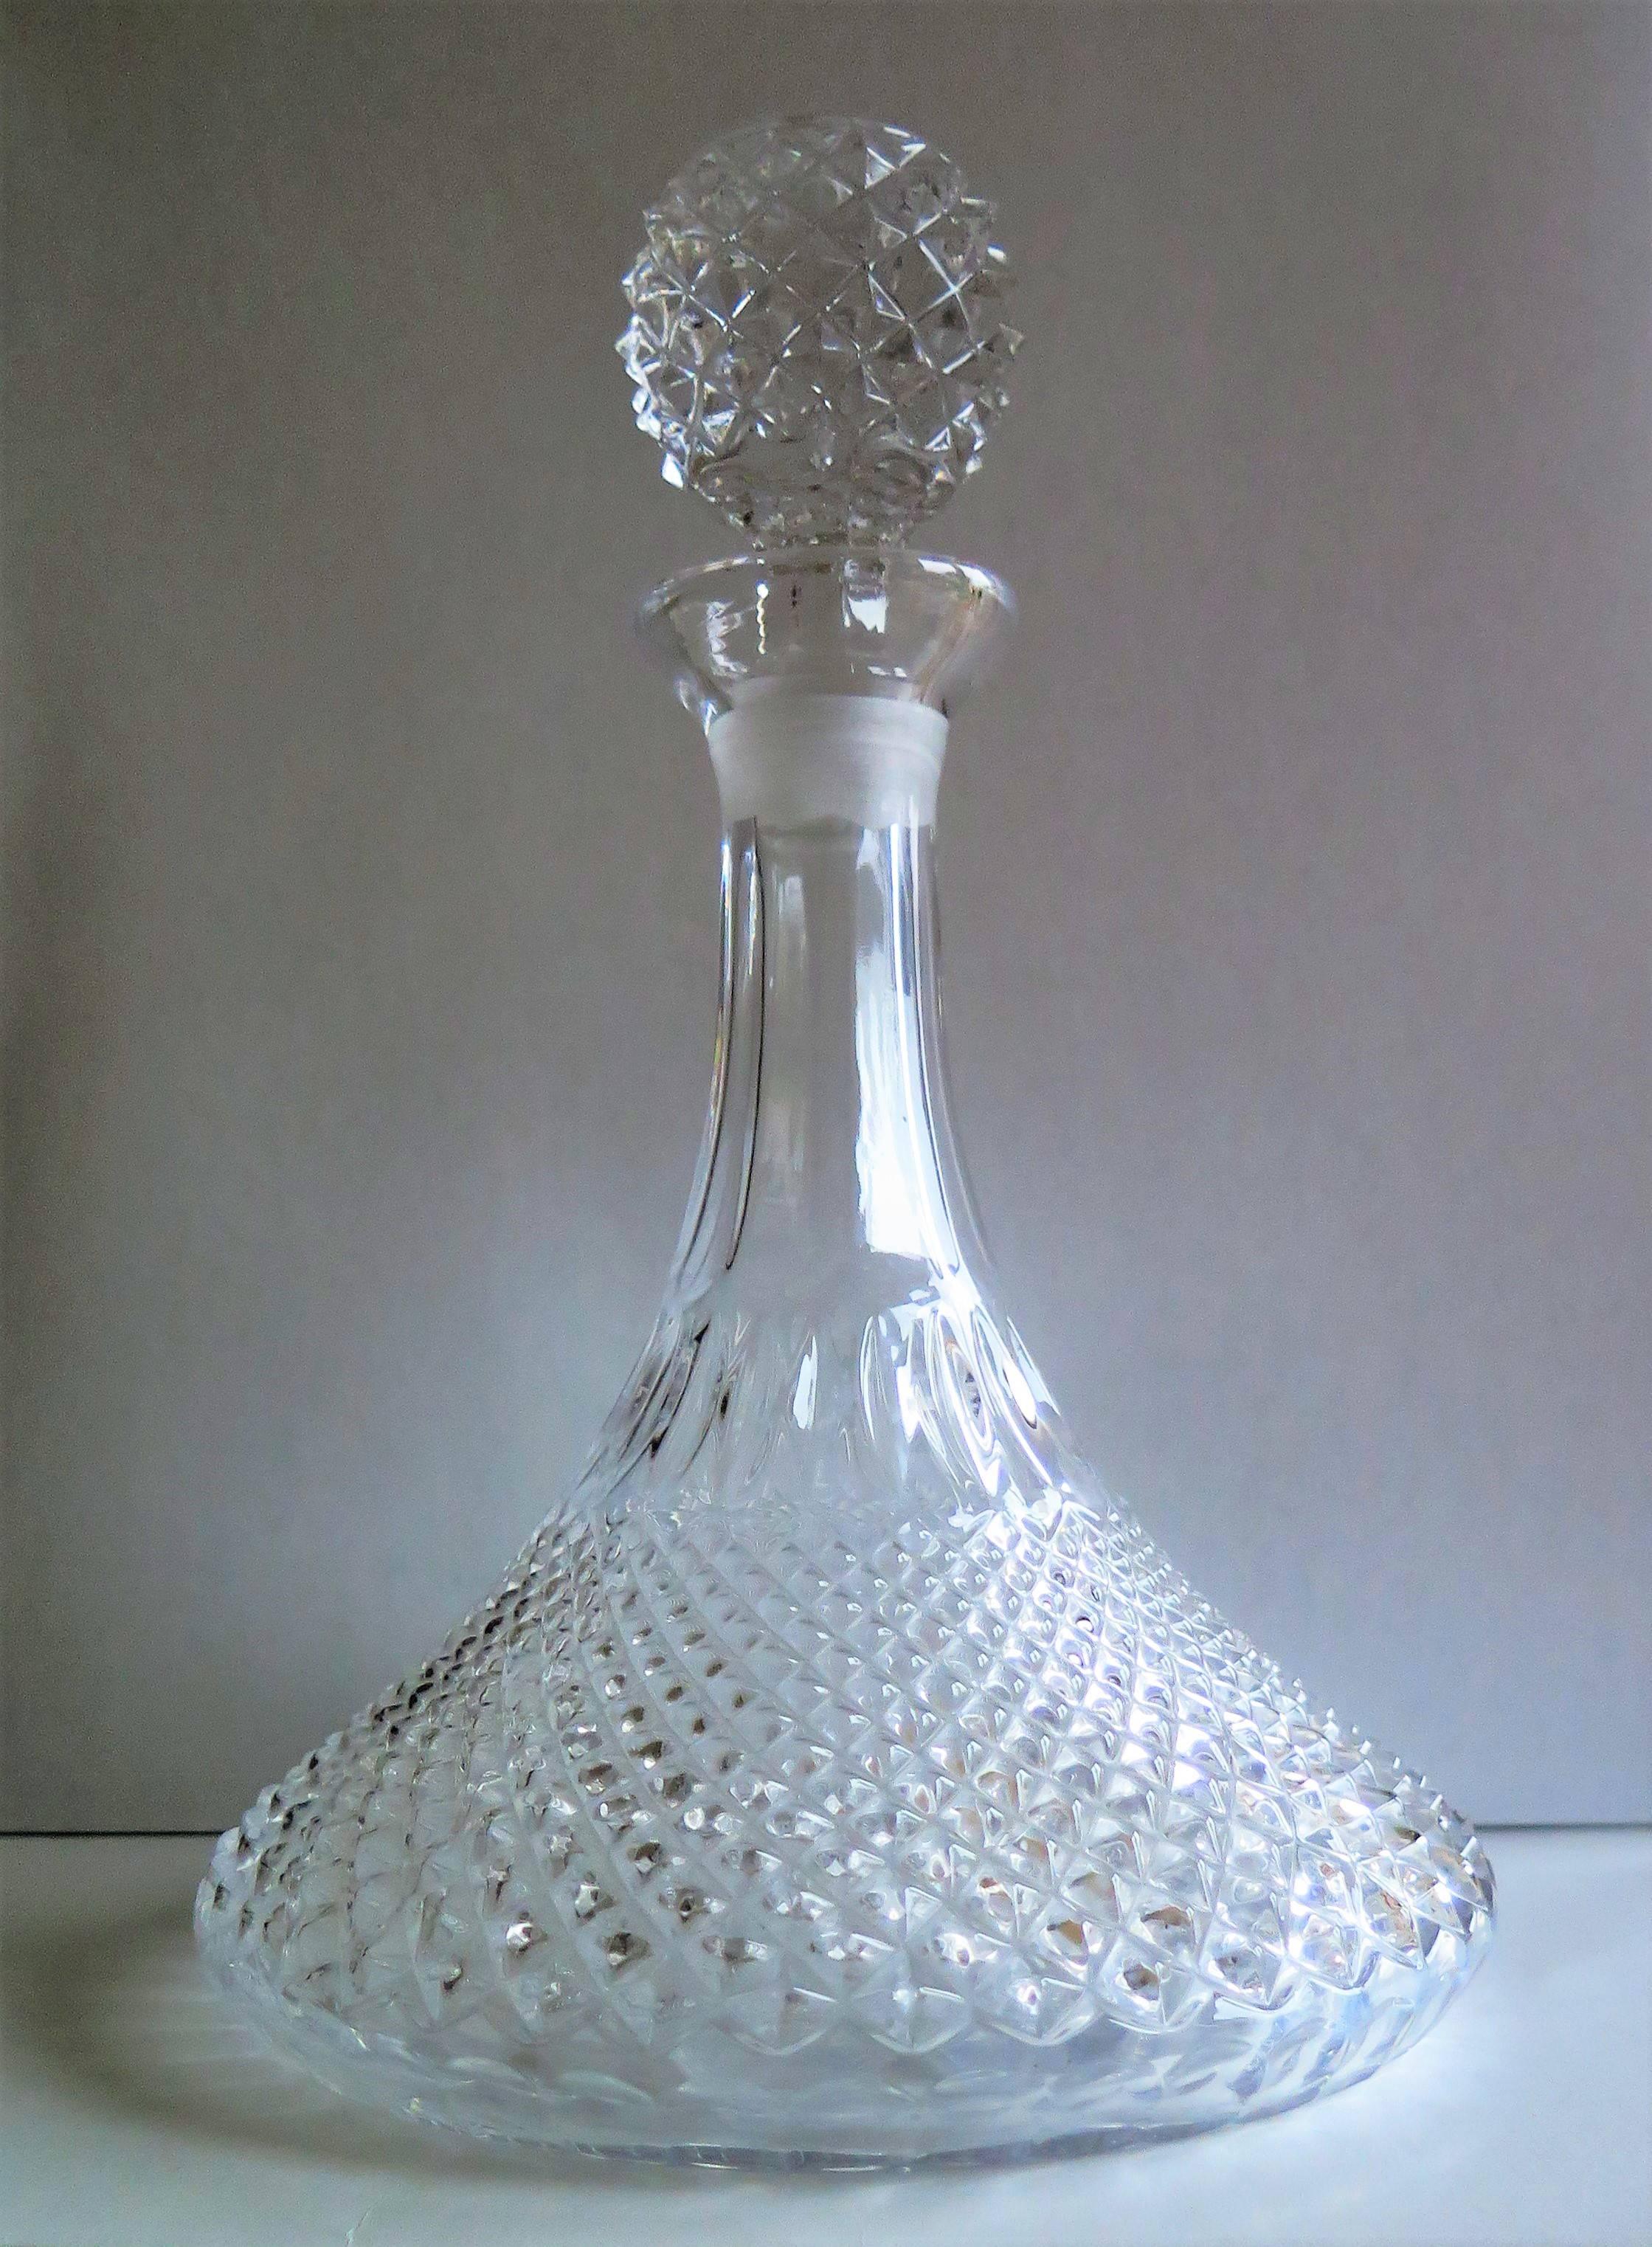 This is a Ship's Decanter with a wide base made from heavy crystal or cut glass having a soft light grey colour.

The decanter is diamond cut to its lower half with the diamonds graduating from the base, getting smaller towards the centre, below